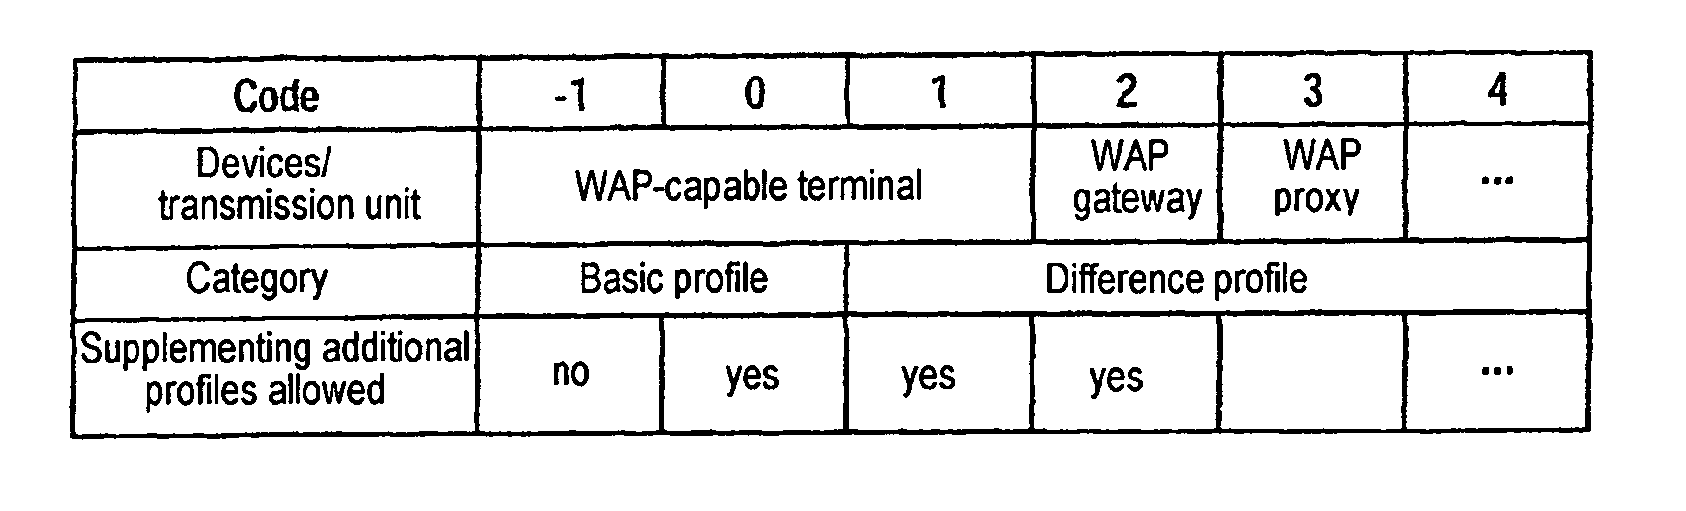 Method for the transmission of user data objects